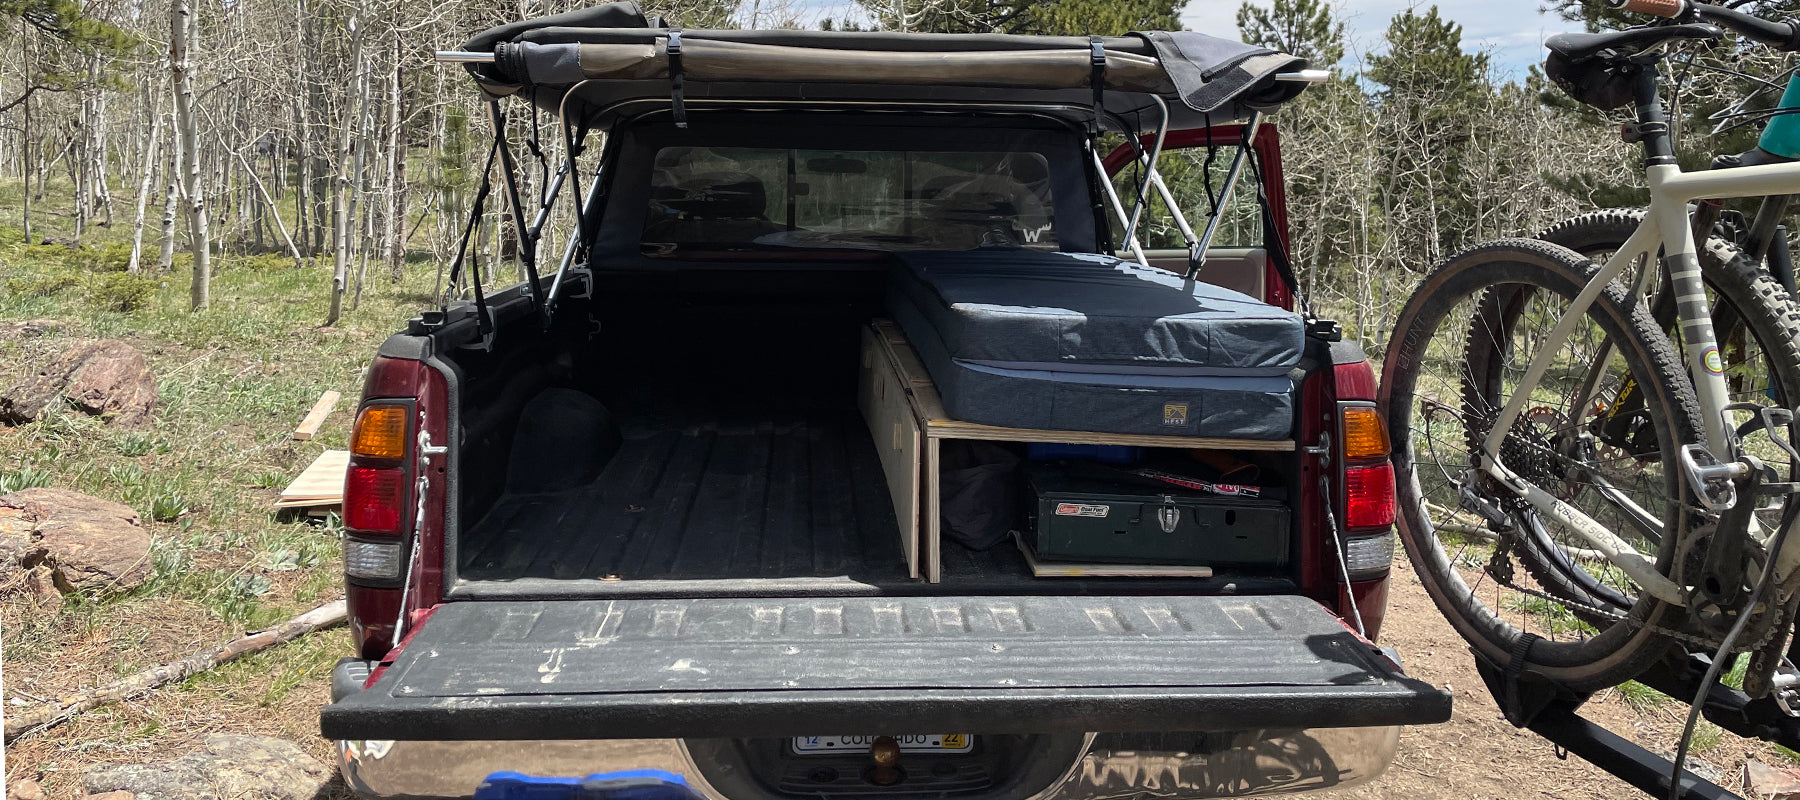 Toyota Tundra truck bed camping set up